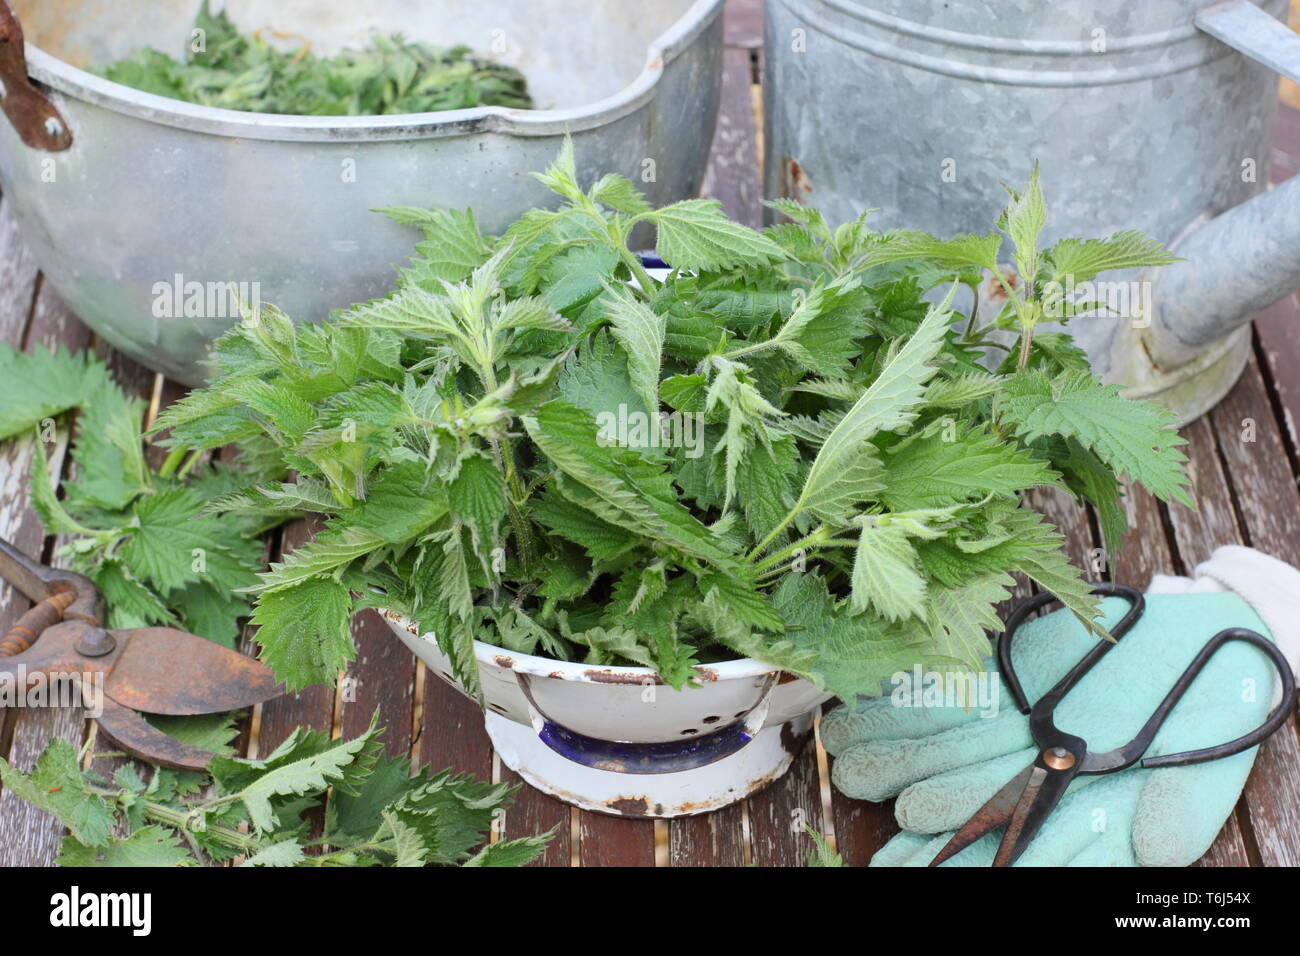 Urtica dioica. Preparing to make nettle fertiliser with freshly picked stinging nettles,gloves, scissors, container and watering can Stock Photo